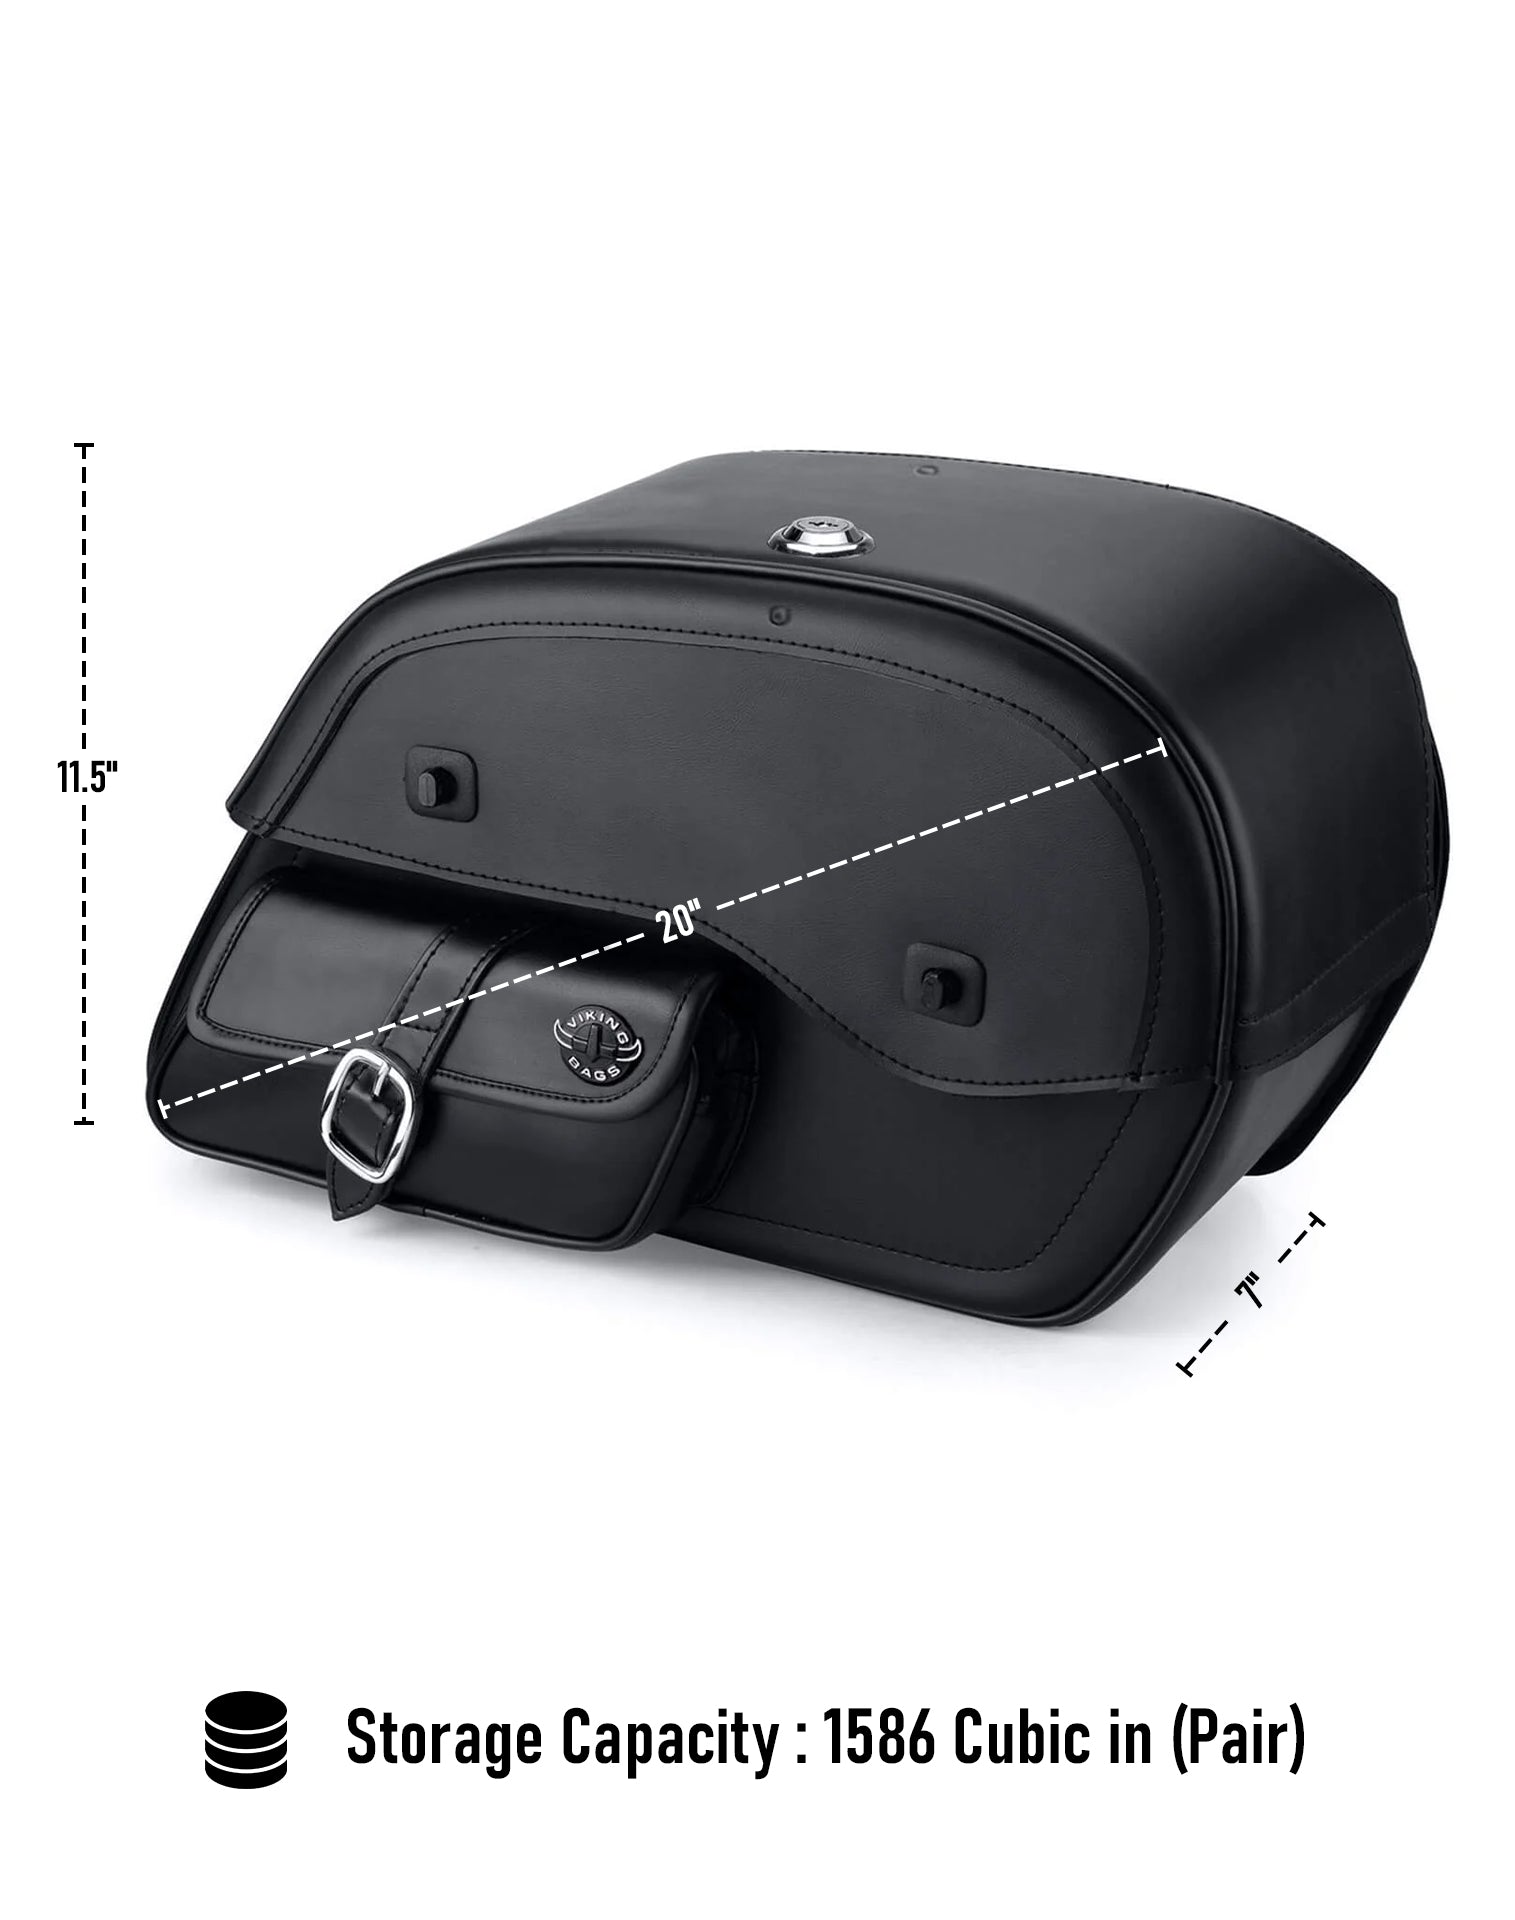 Viking Essential Side Pocket Large Honda Vtx 1300 T Tourer Shock Cutout Leather Motorcycle Saddlebags Can Store Your Ridings Gears